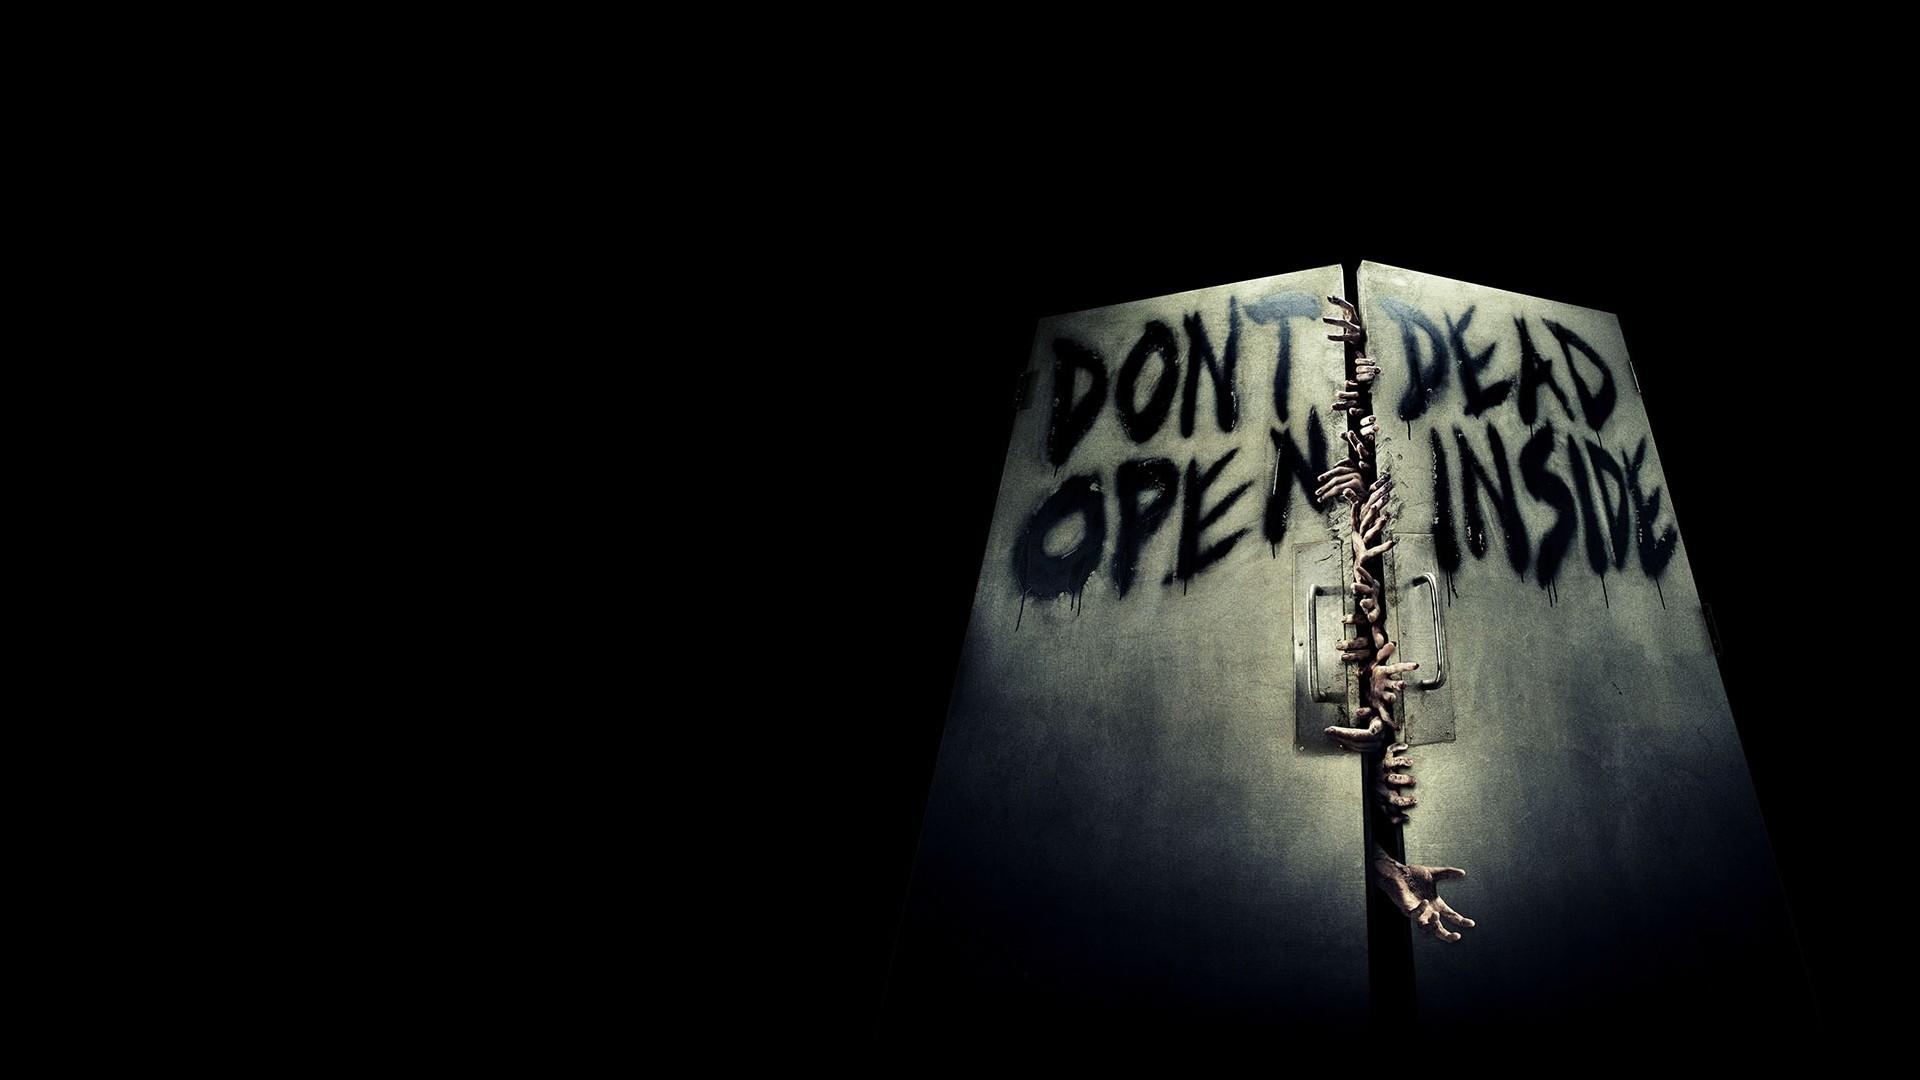 Do not open, inside Death wallpaper and image